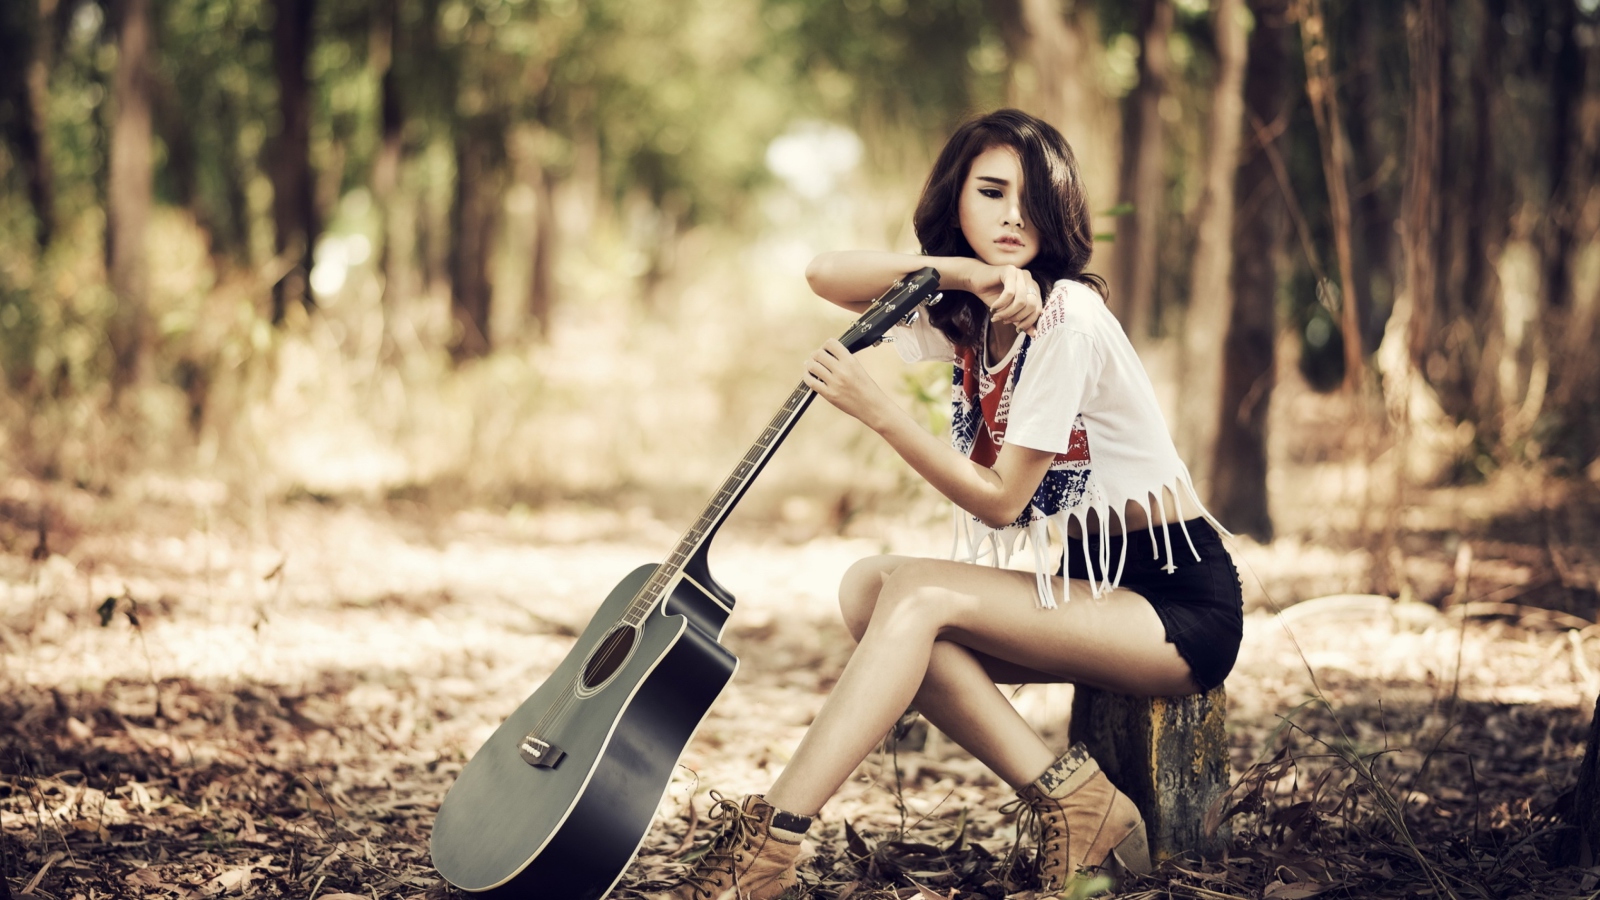 Pretty Brunette Model With Guitar At Meadow screenshot #1 1600x900